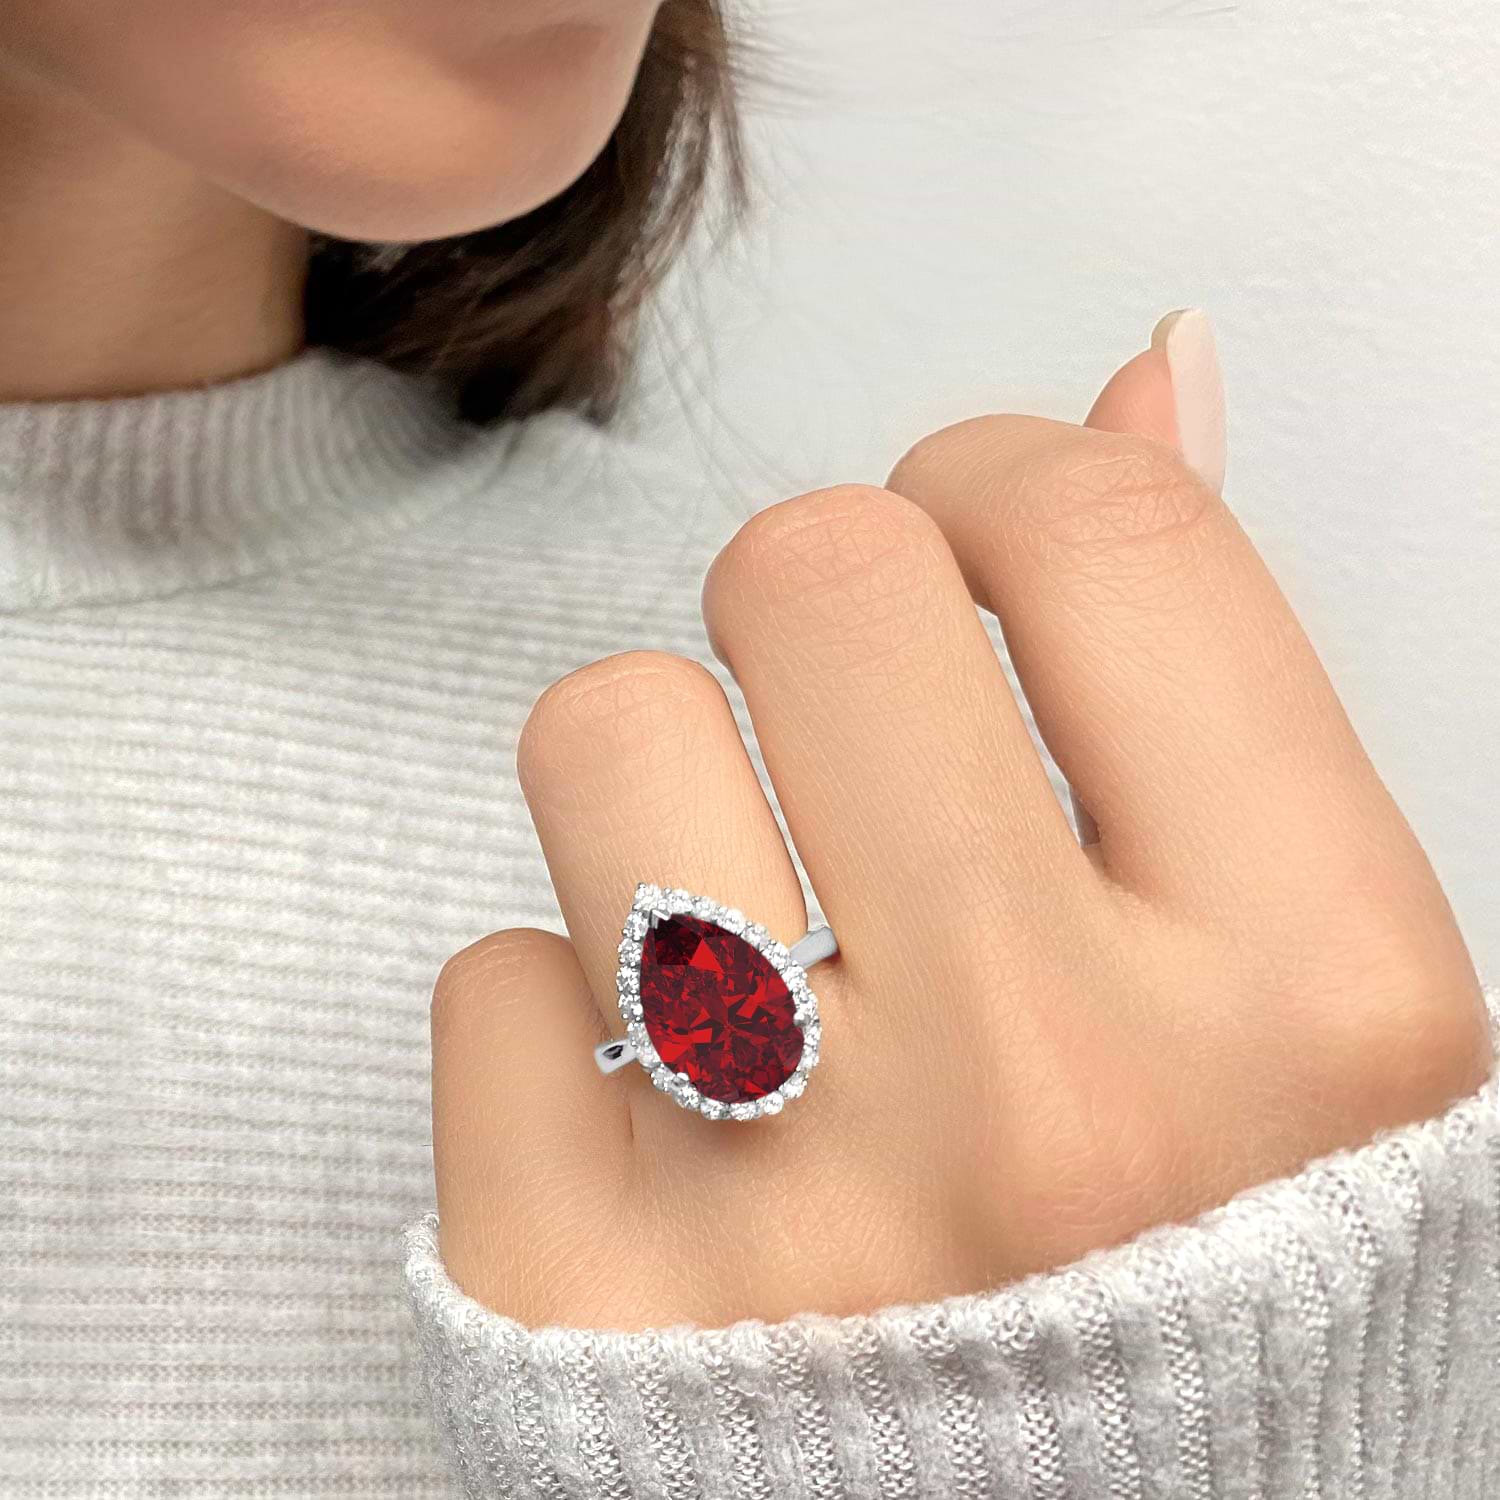 Pear Cut Halo Lab Ruby & Diamond Engagement Ring 14K White Gold 8.34ct